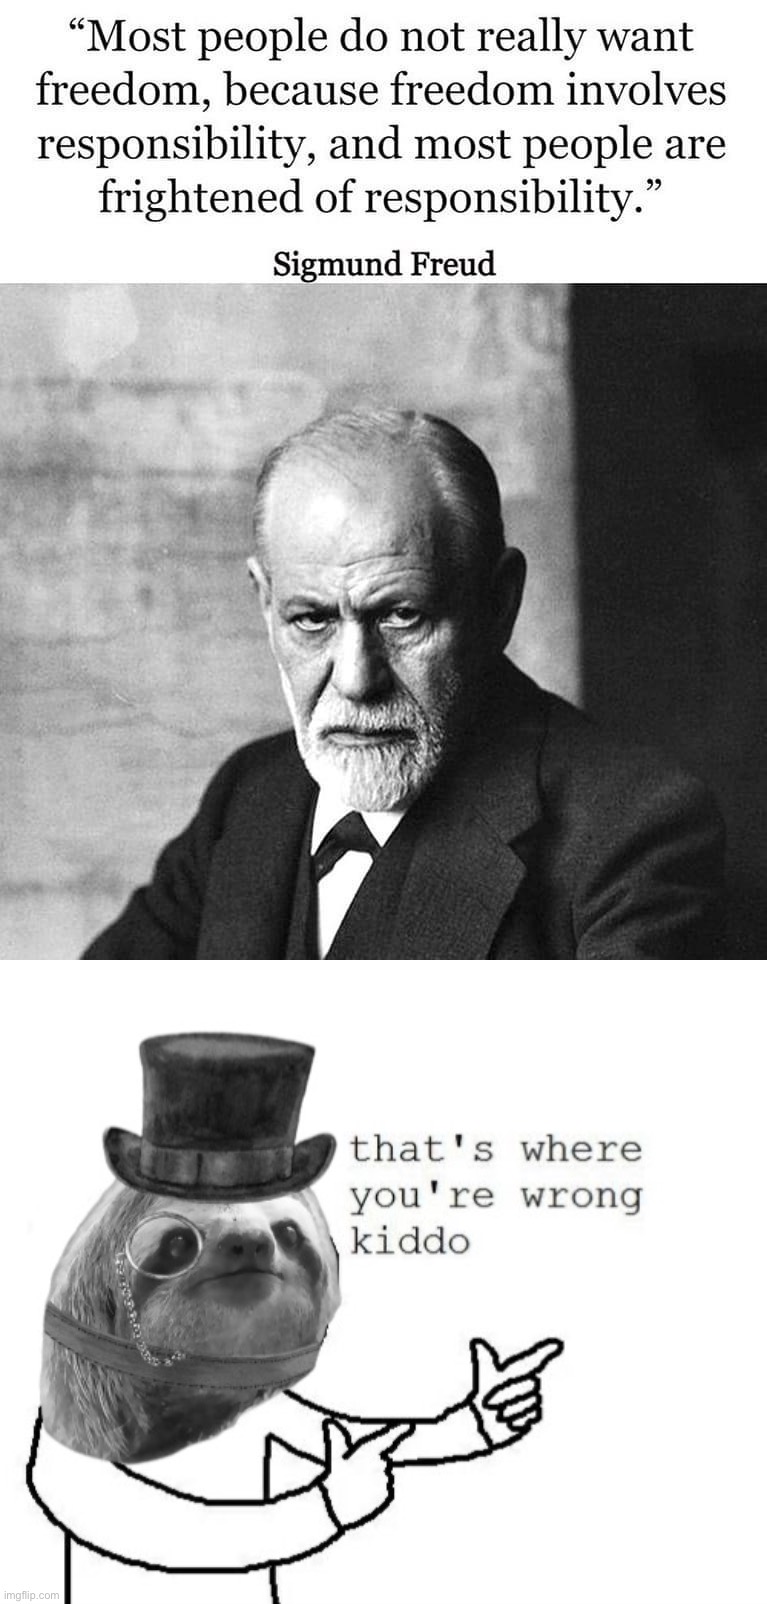 Oh yeah? Responsibility? How about freedom with a side of more freedom? Suck it, Sigmund | image tagged in sigmund freud quote,freedom,more freedom,freedomer,freedomest,doubleplusfreedom | made w/ Imgflip meme maker